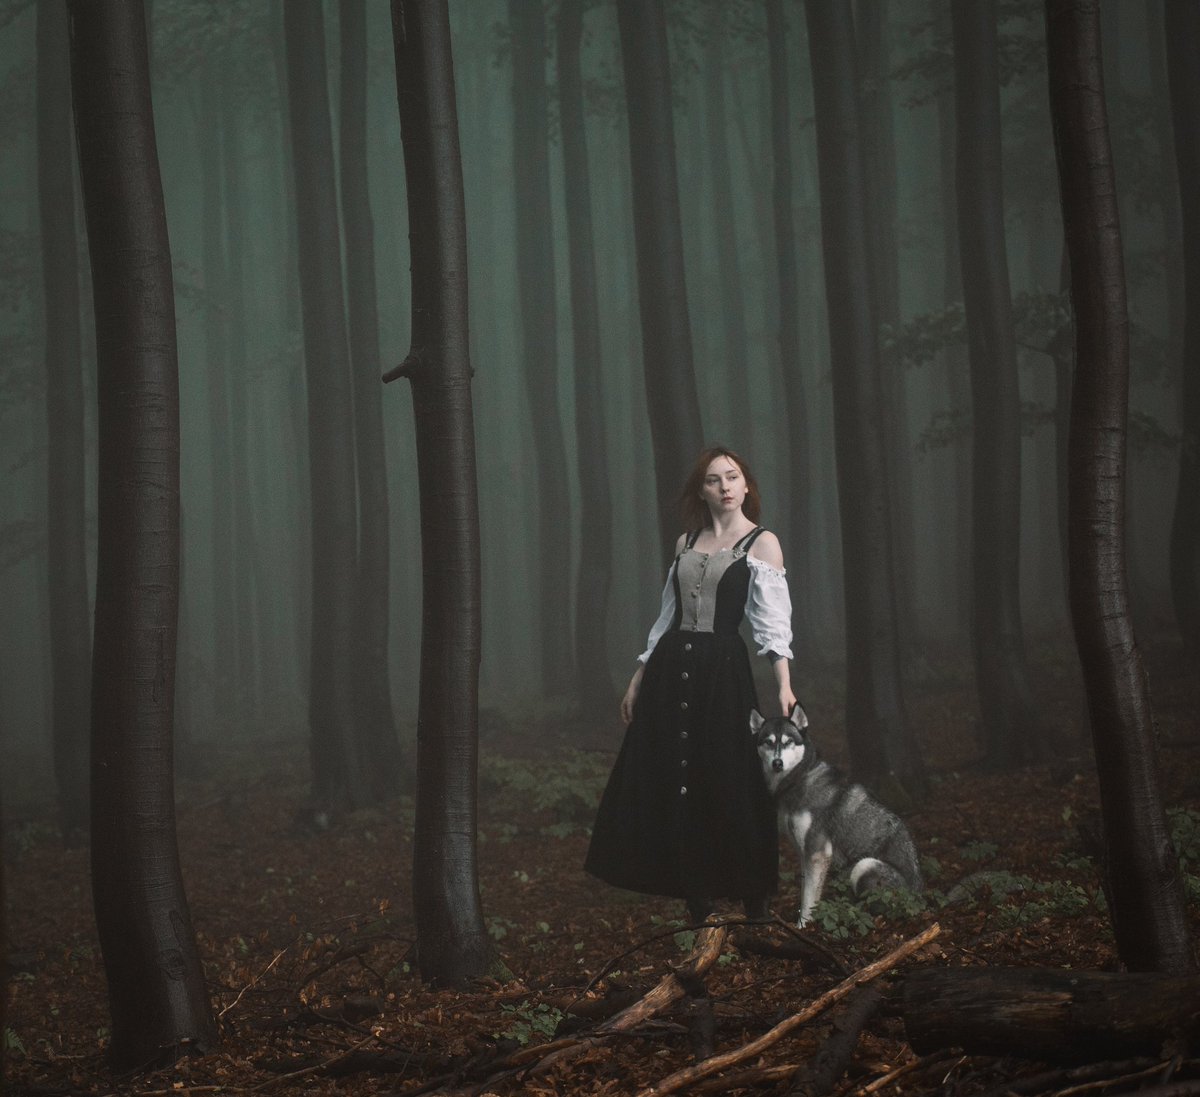 'Wandering in the fog'

Self-portrait with my beloved dog.

#nordic #fairytale #middleearth #gothaesthetic #darkelf #fantasy #slavic #folklore #pagan #goblincore #folkscenery #husky #wolf #selfportrait #photography